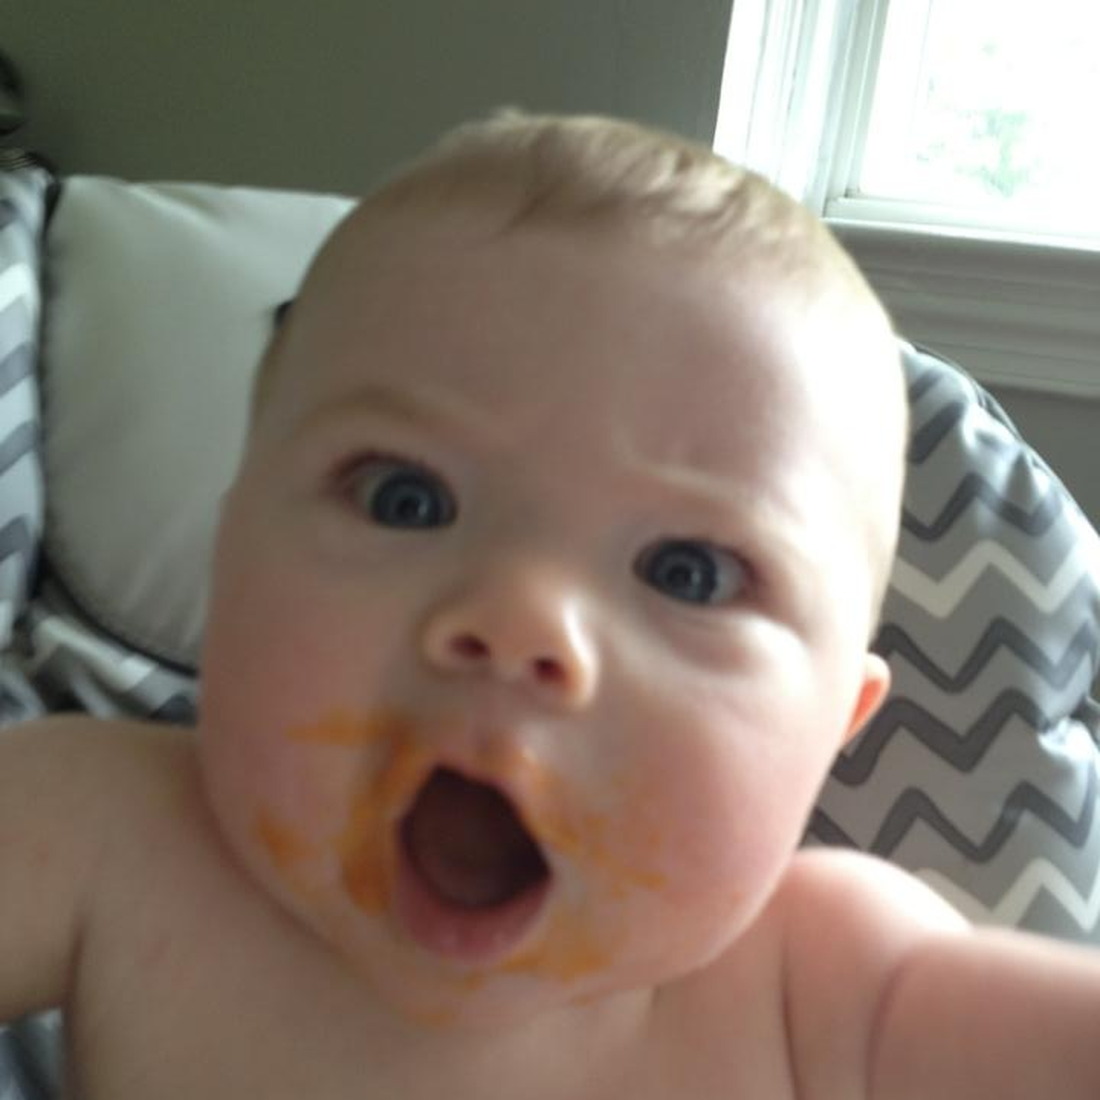 A baby, covered in food with his mouth wide open as if he were screaming